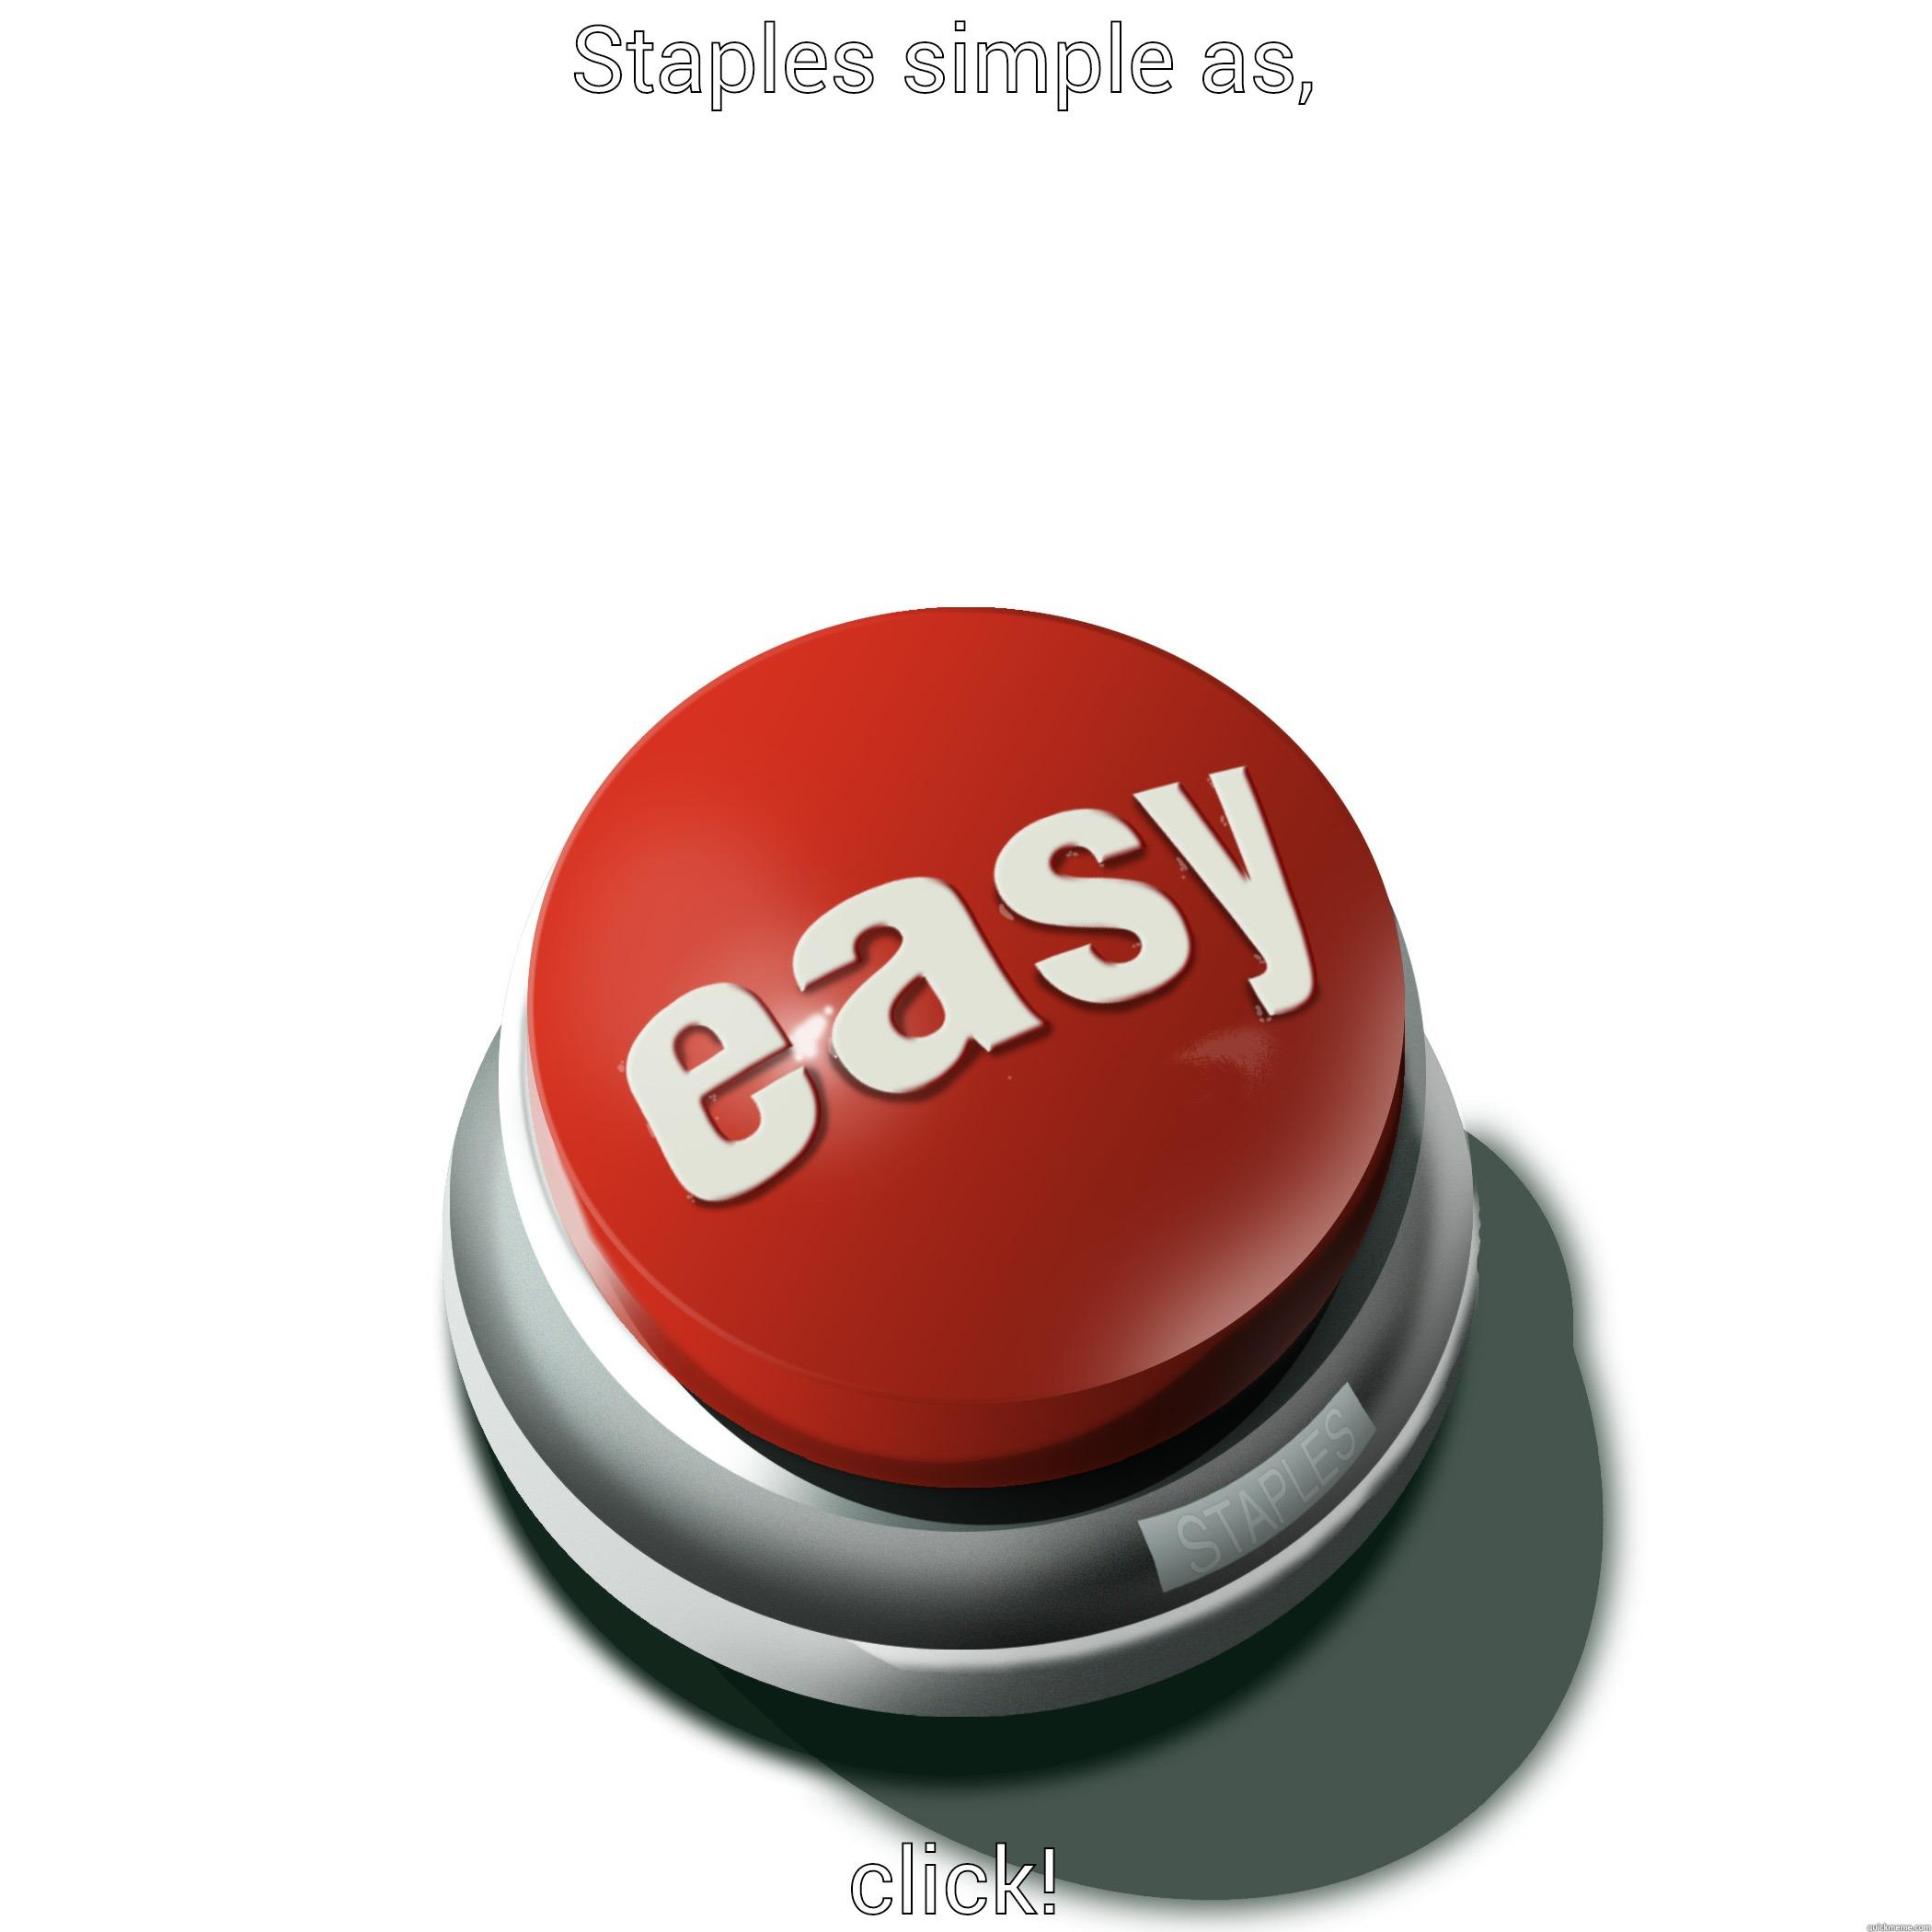 STAPLES SIMPLE AS,  CLICK! Misc